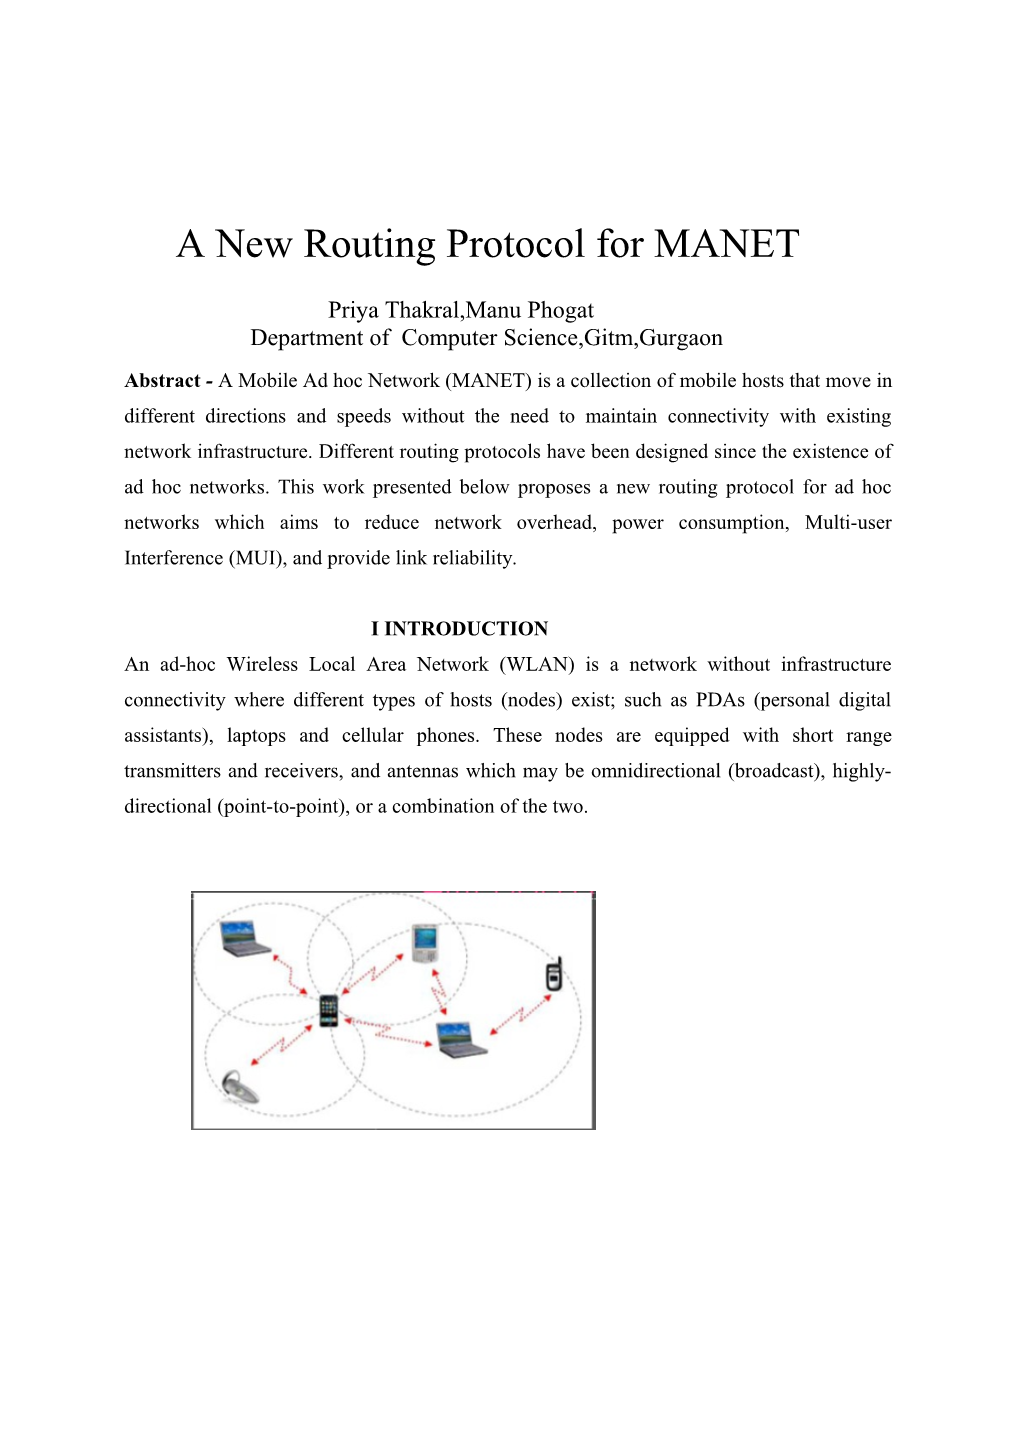 A New Routing Protocol for MANET